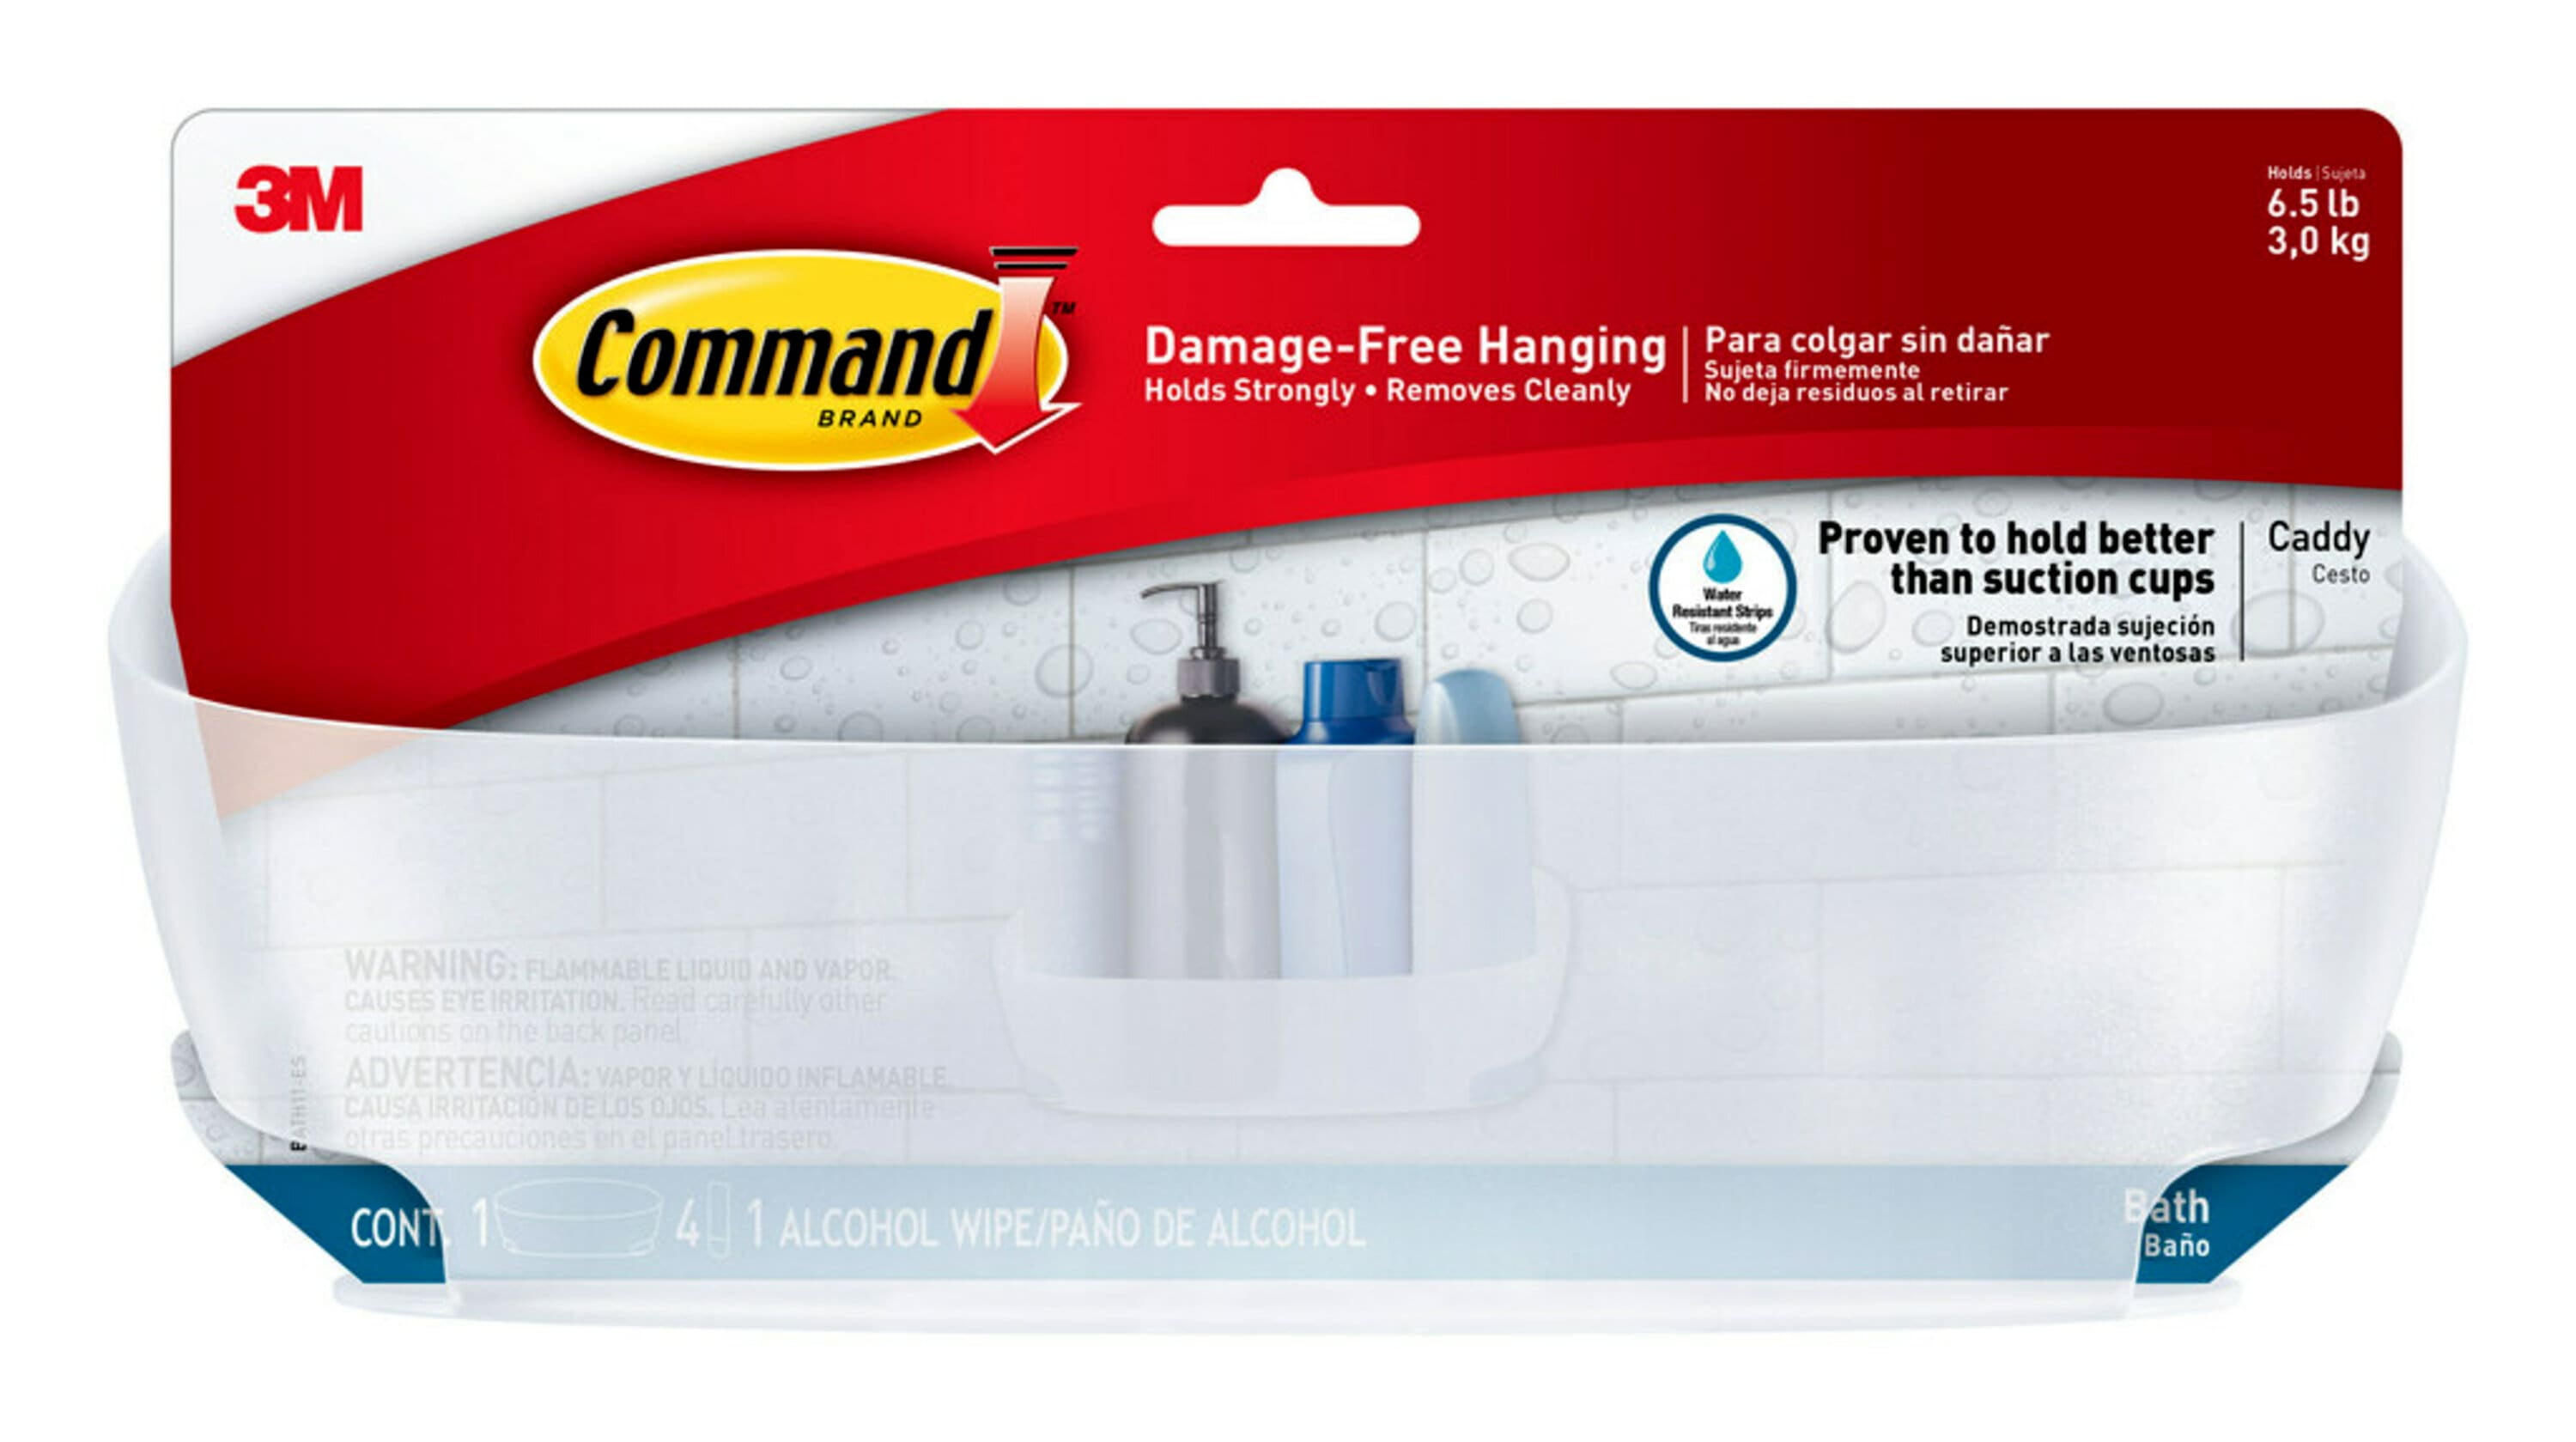 Command Shower Caddy, Frosted, Large, 1 Caddy, 4 Water Resistant Strips, Bathroom Organization